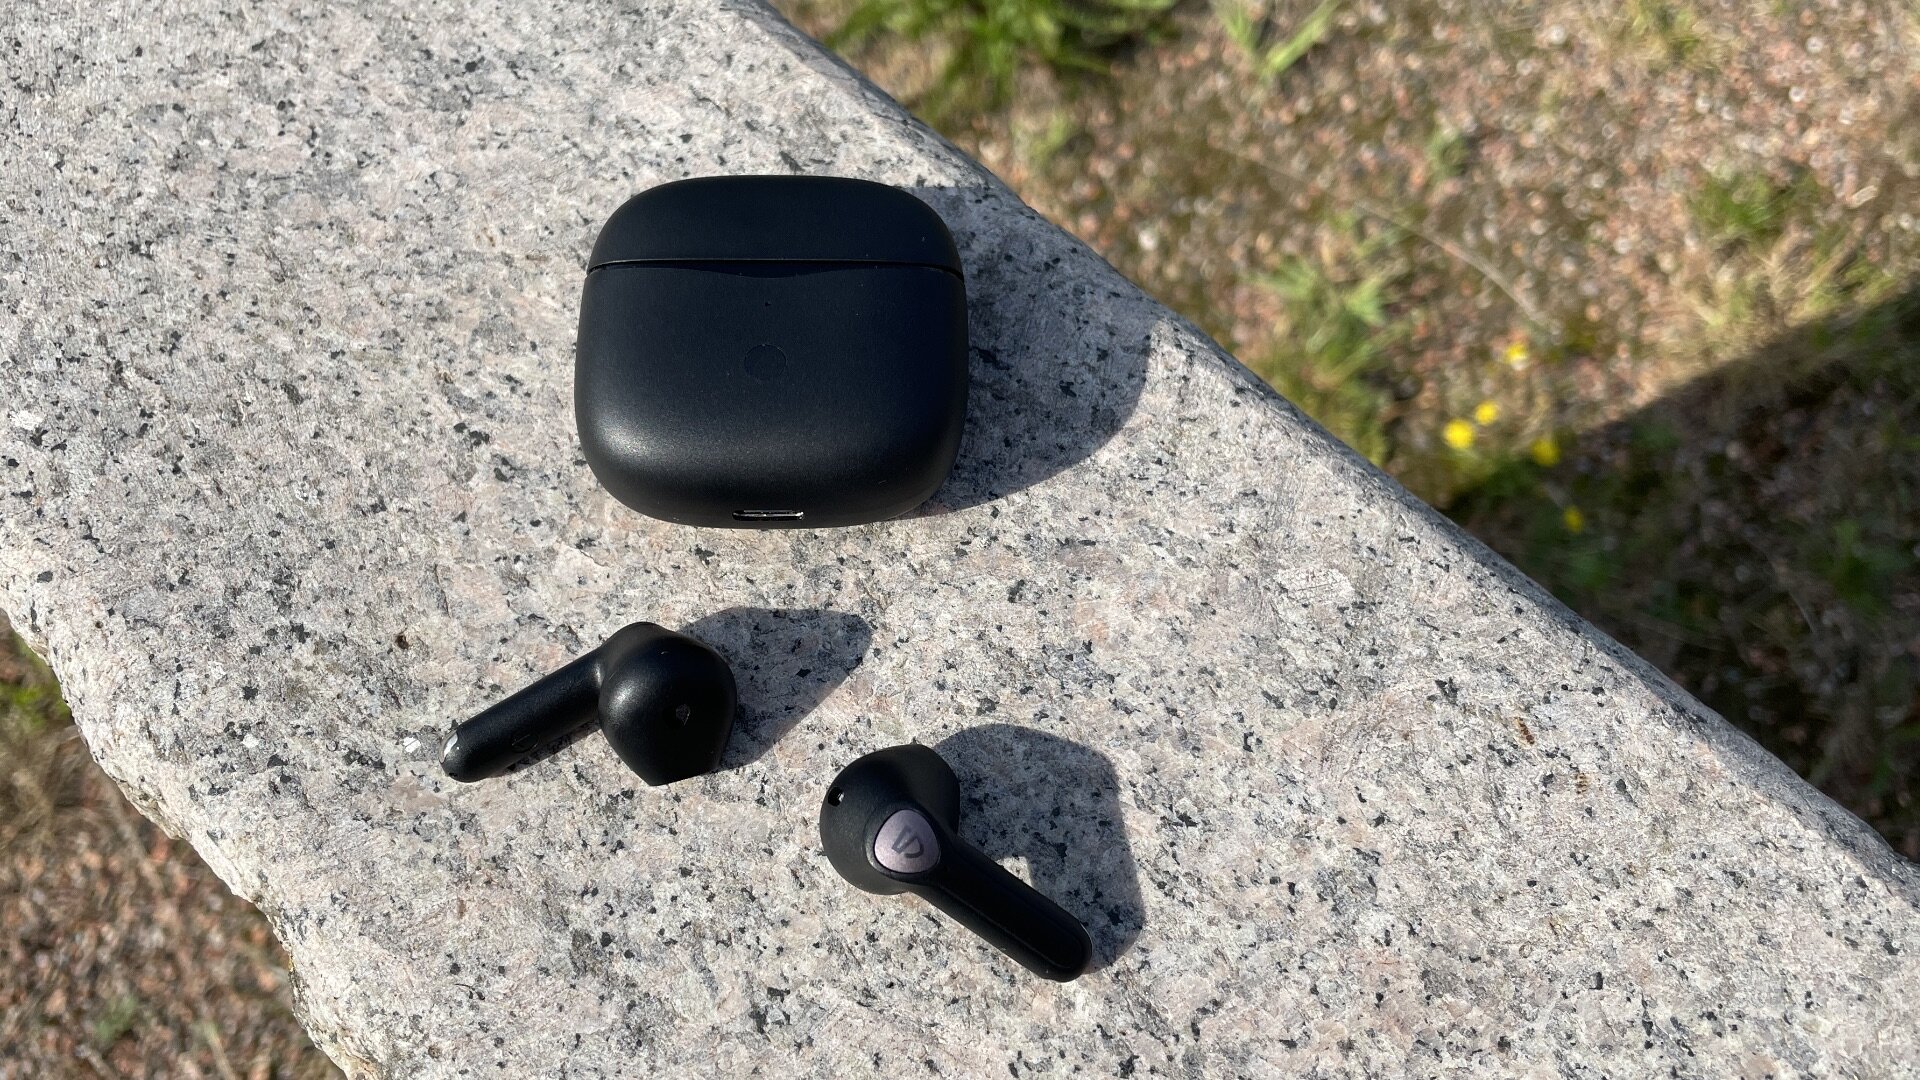 Soundpeats Air3 True Wireless Earbuds: Review 